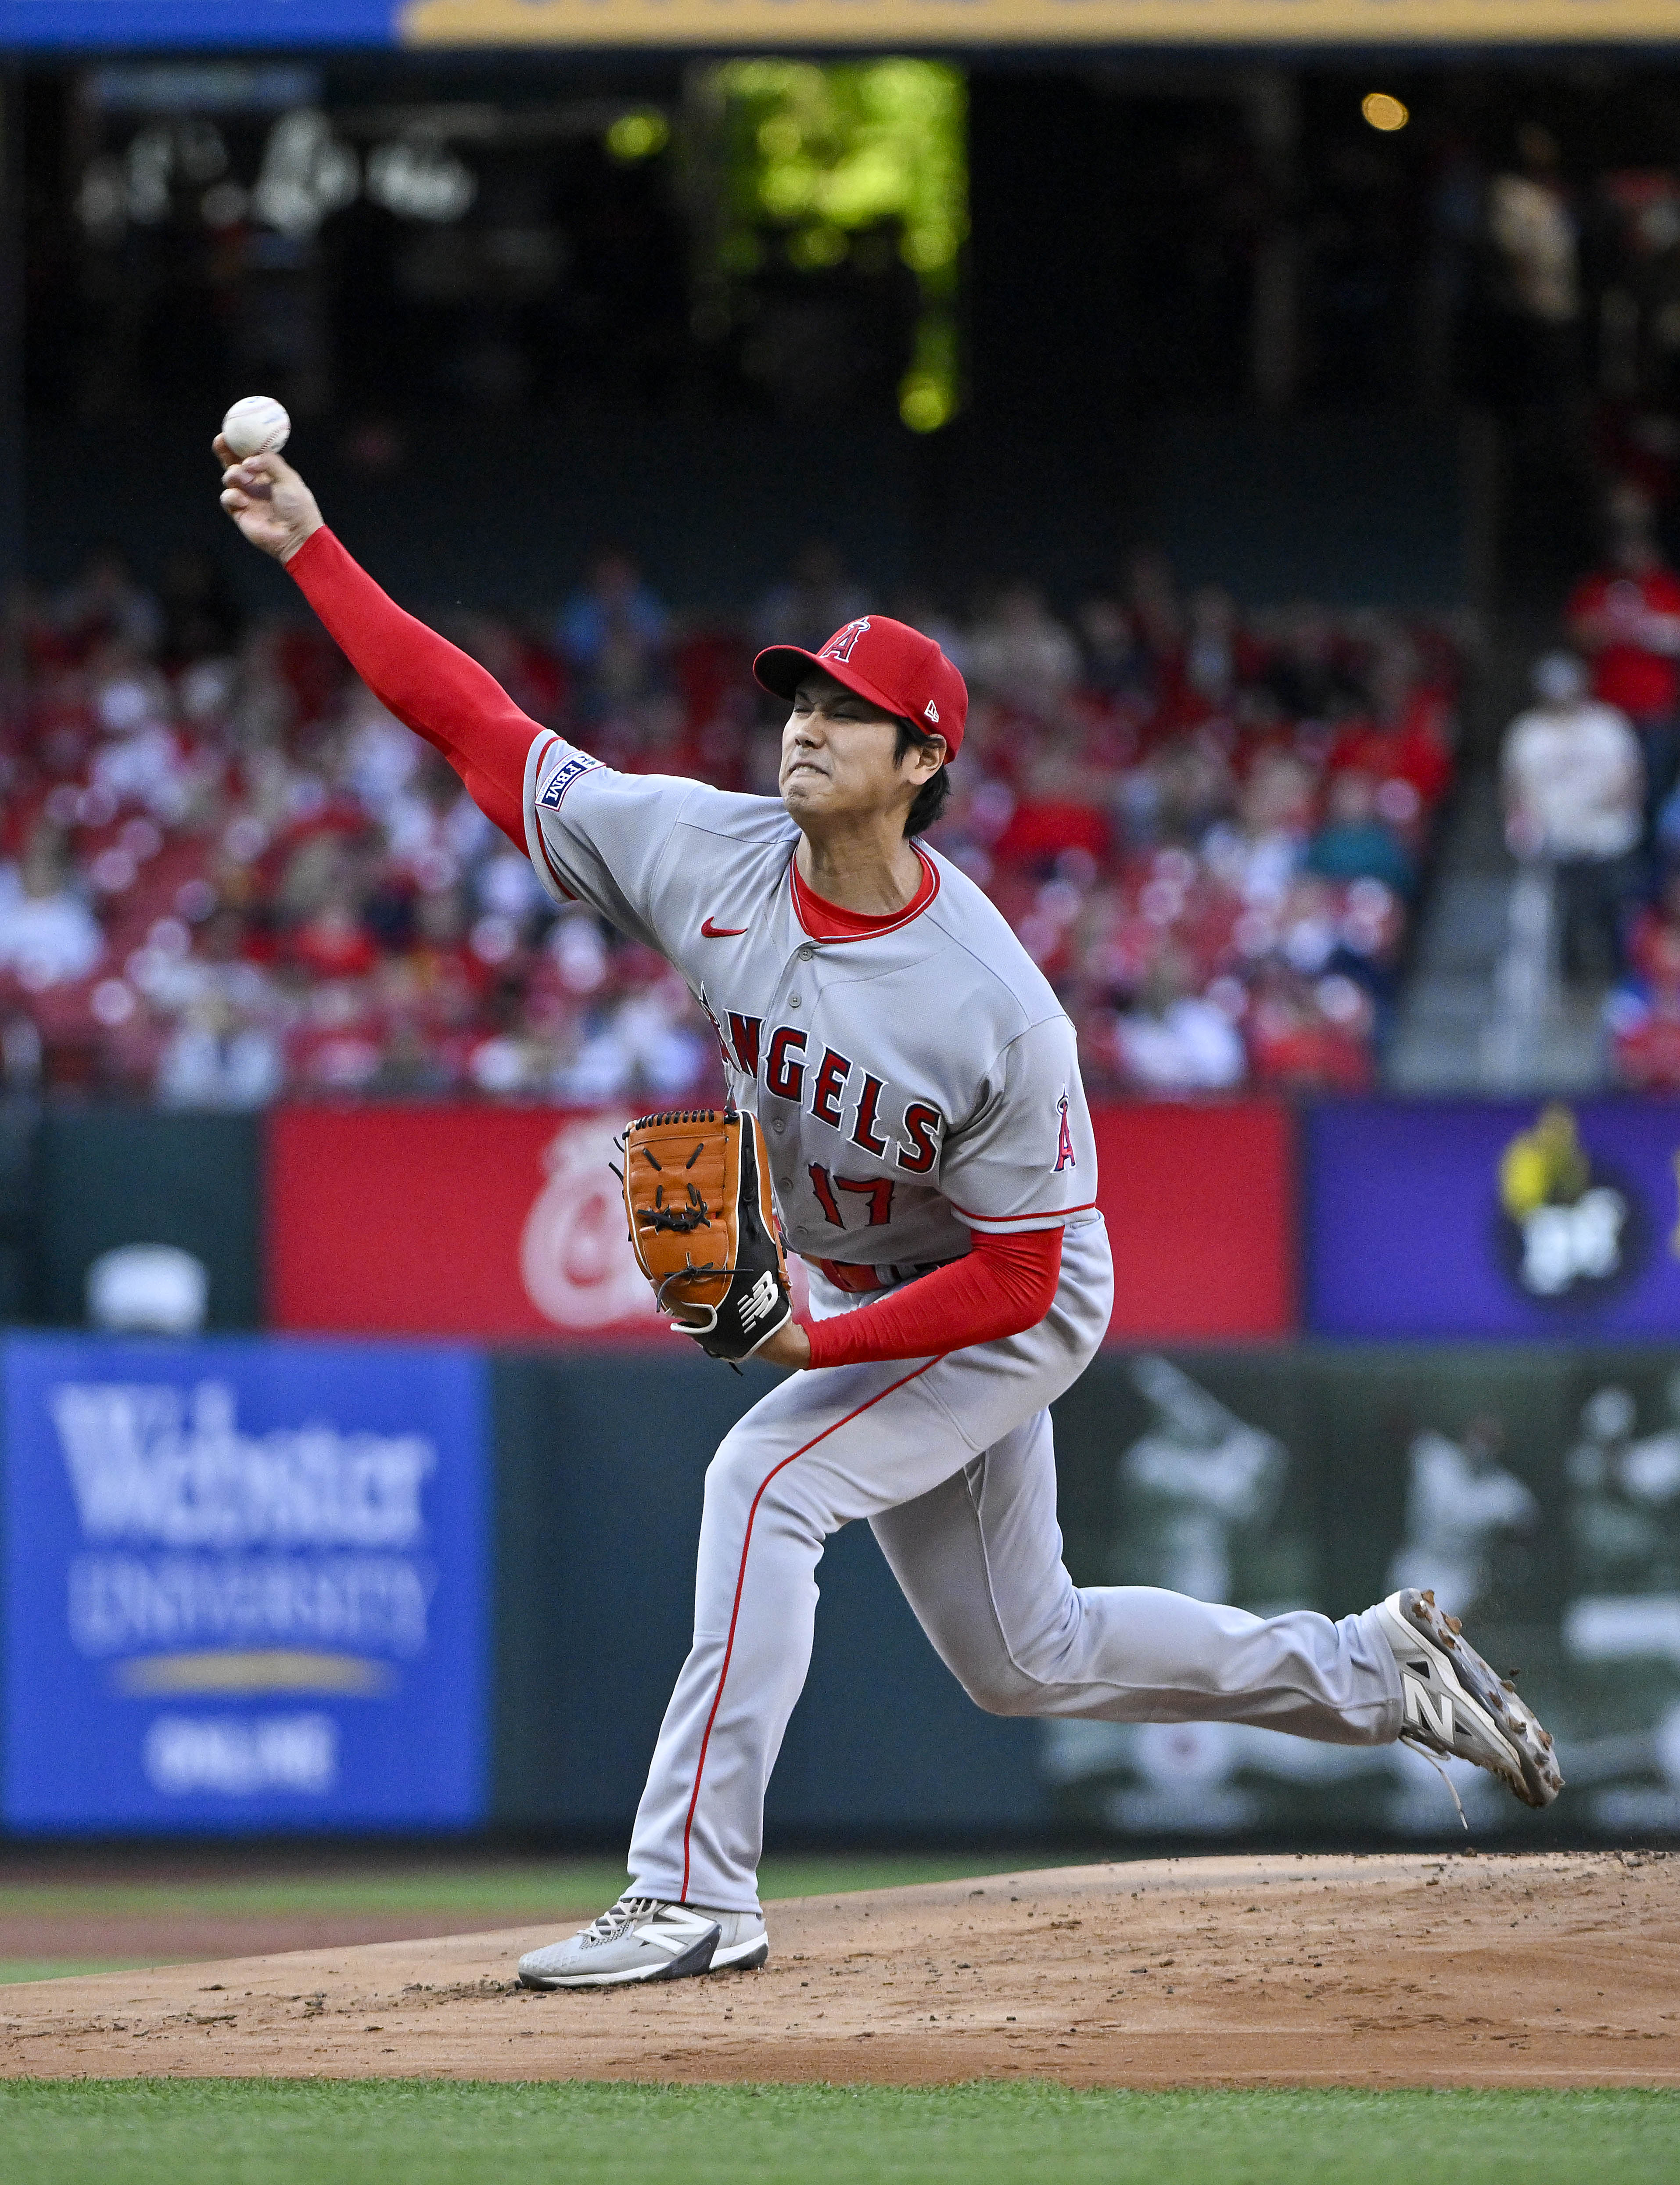 Late-inning heroics lift Angels over Cardinals